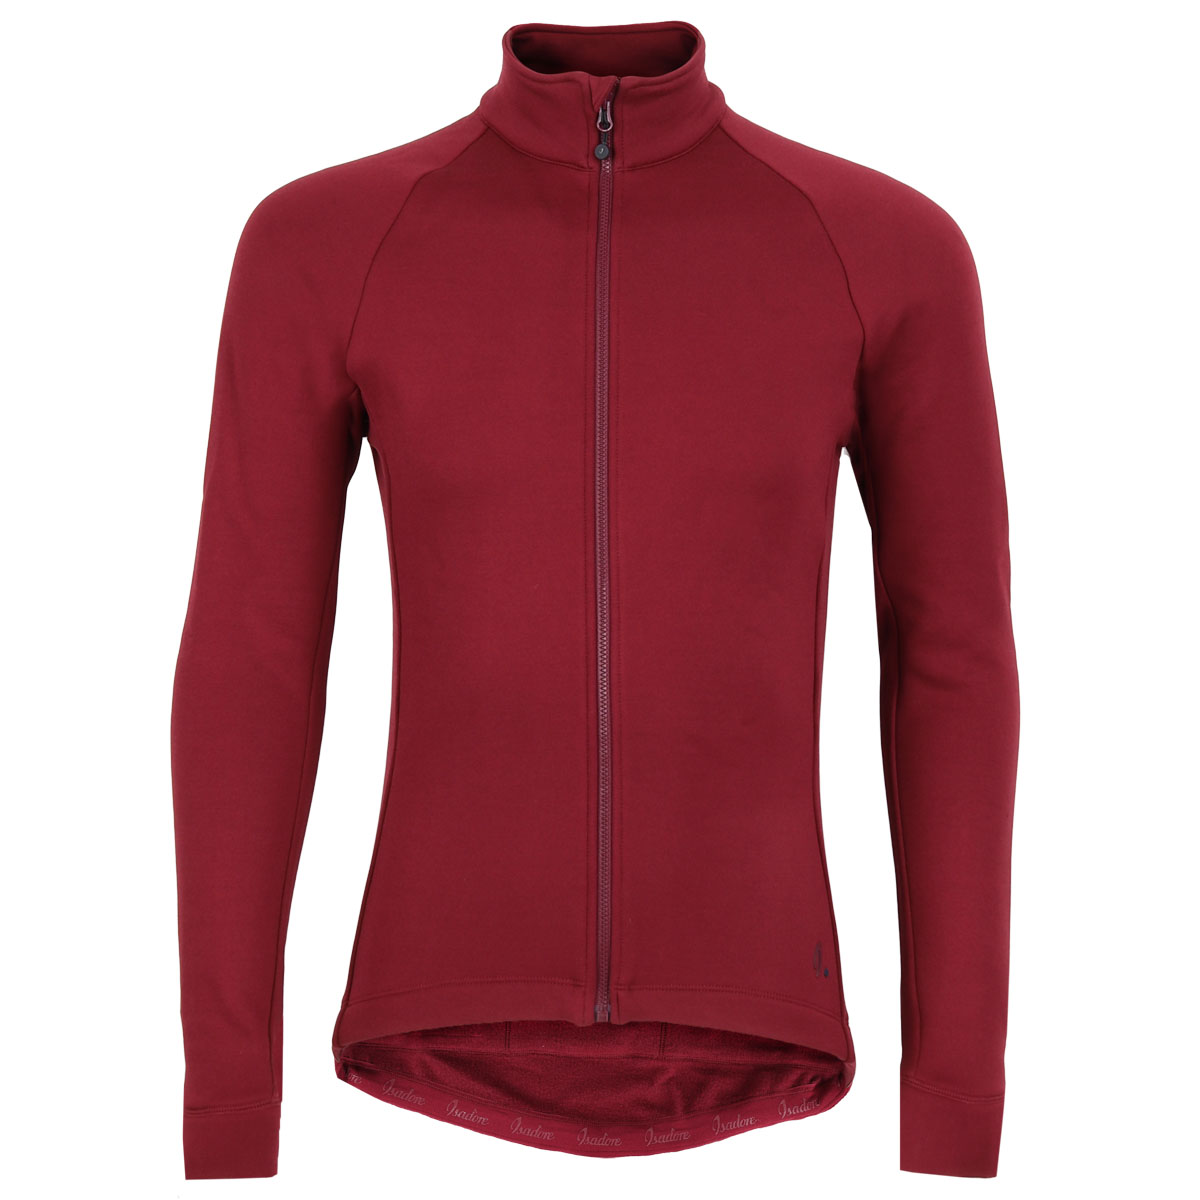 Picture of Isadore TherMerino Jersey - Cabernet